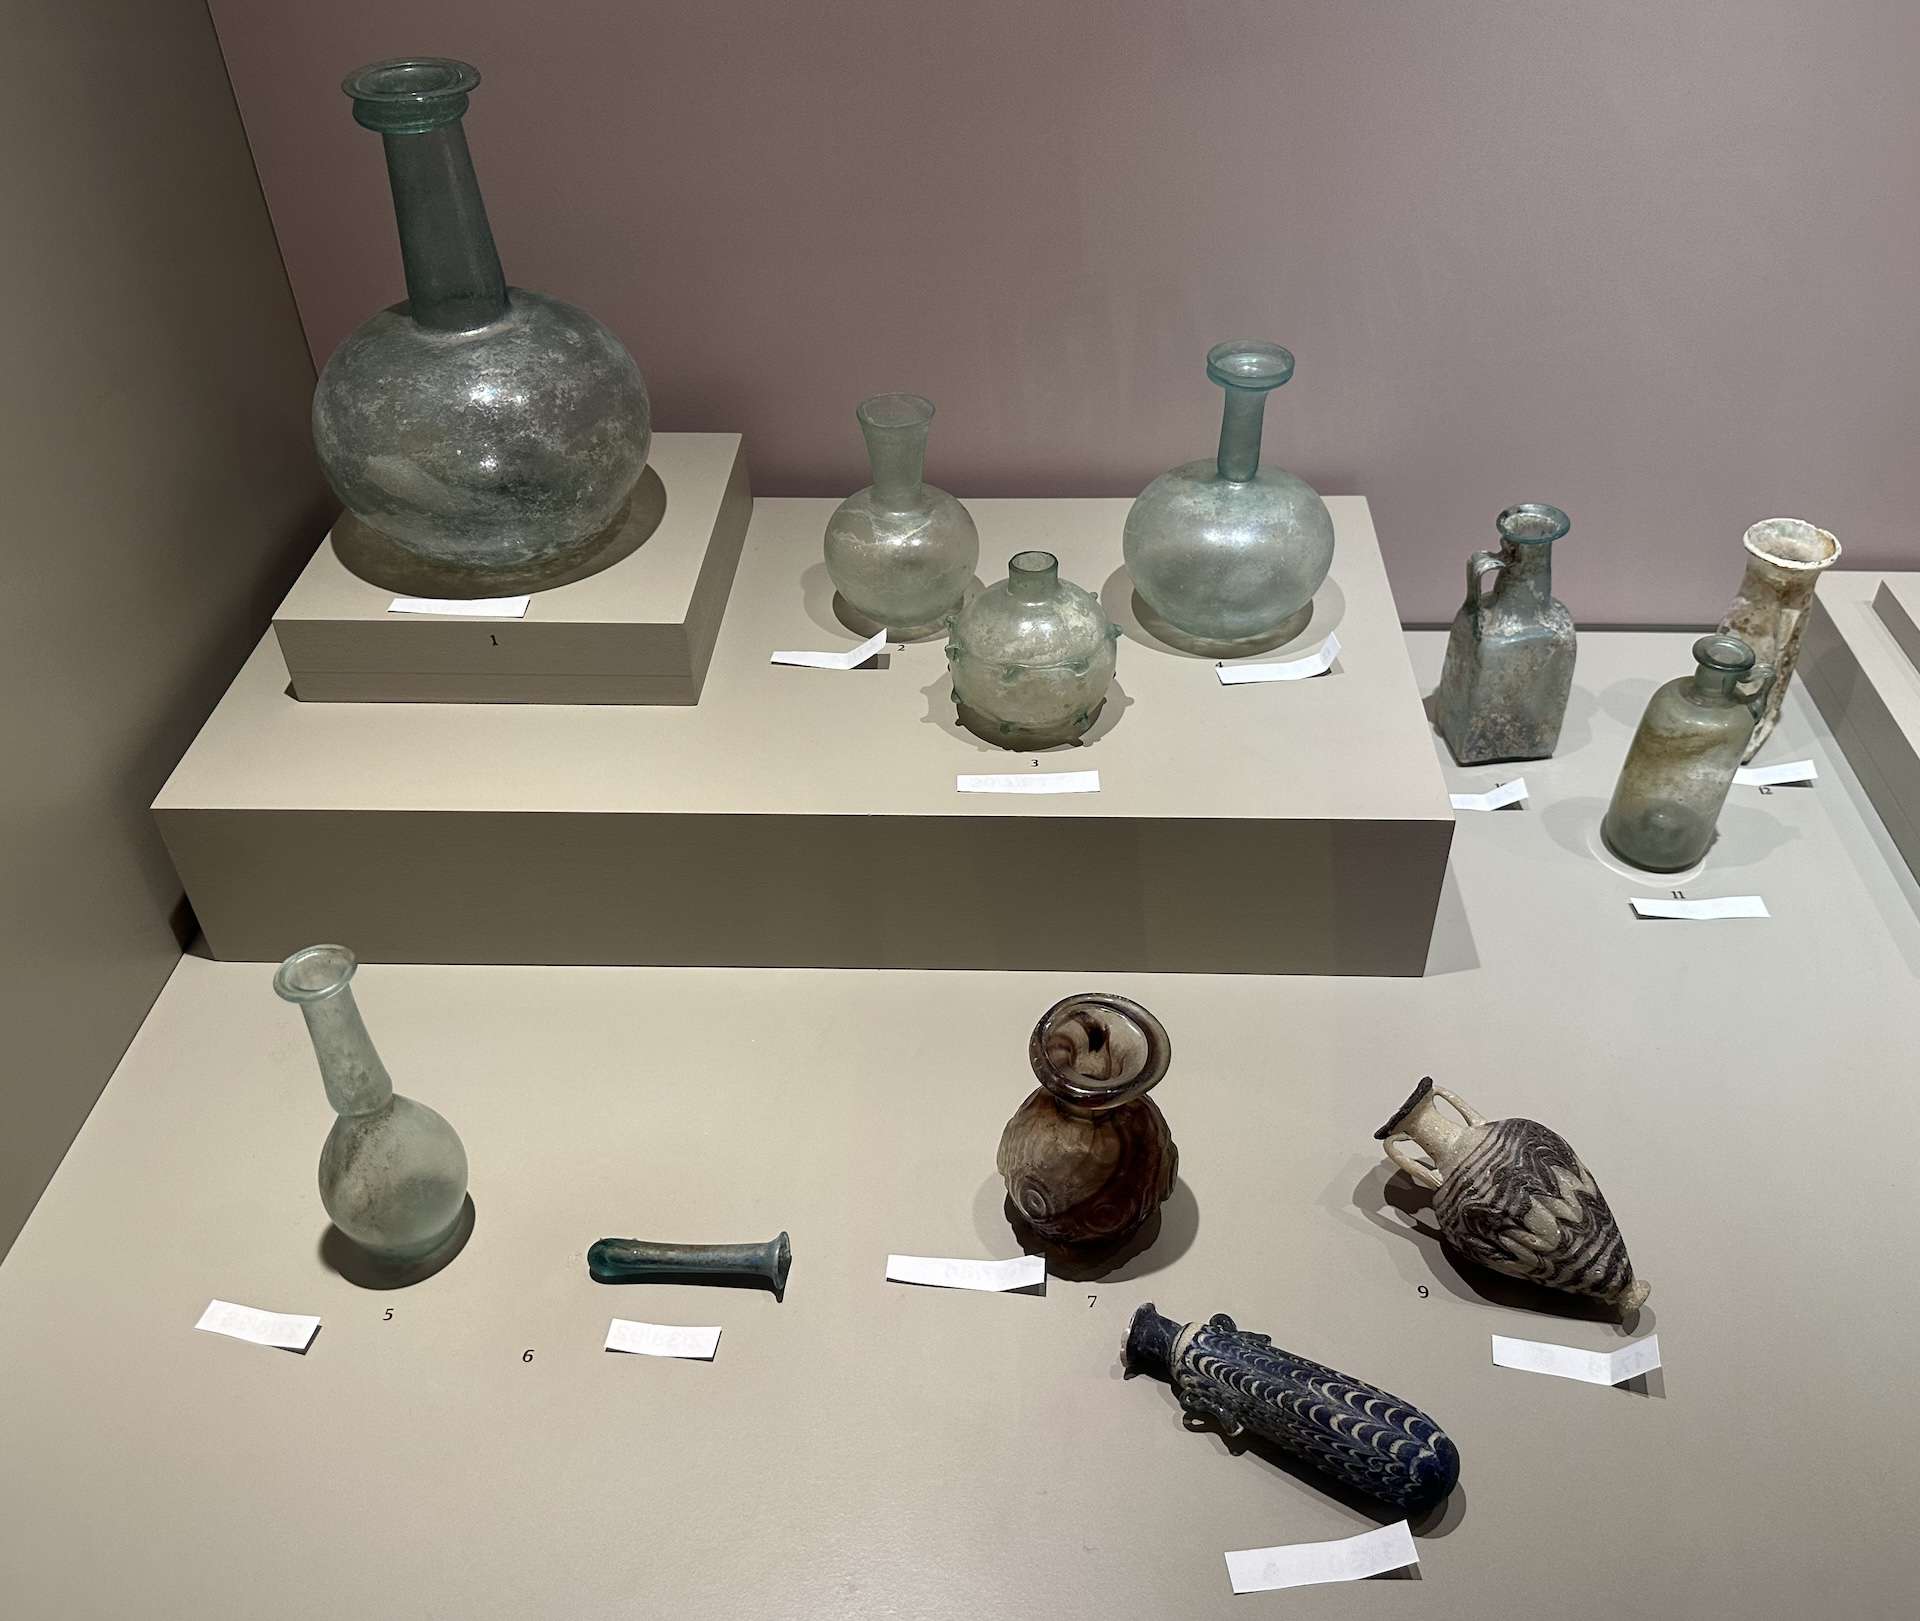 Glass bottles (1st century BC to 4th century AD) in Ephesus Through the Ages at the Ephesus Museum in Selçuk, Turkey